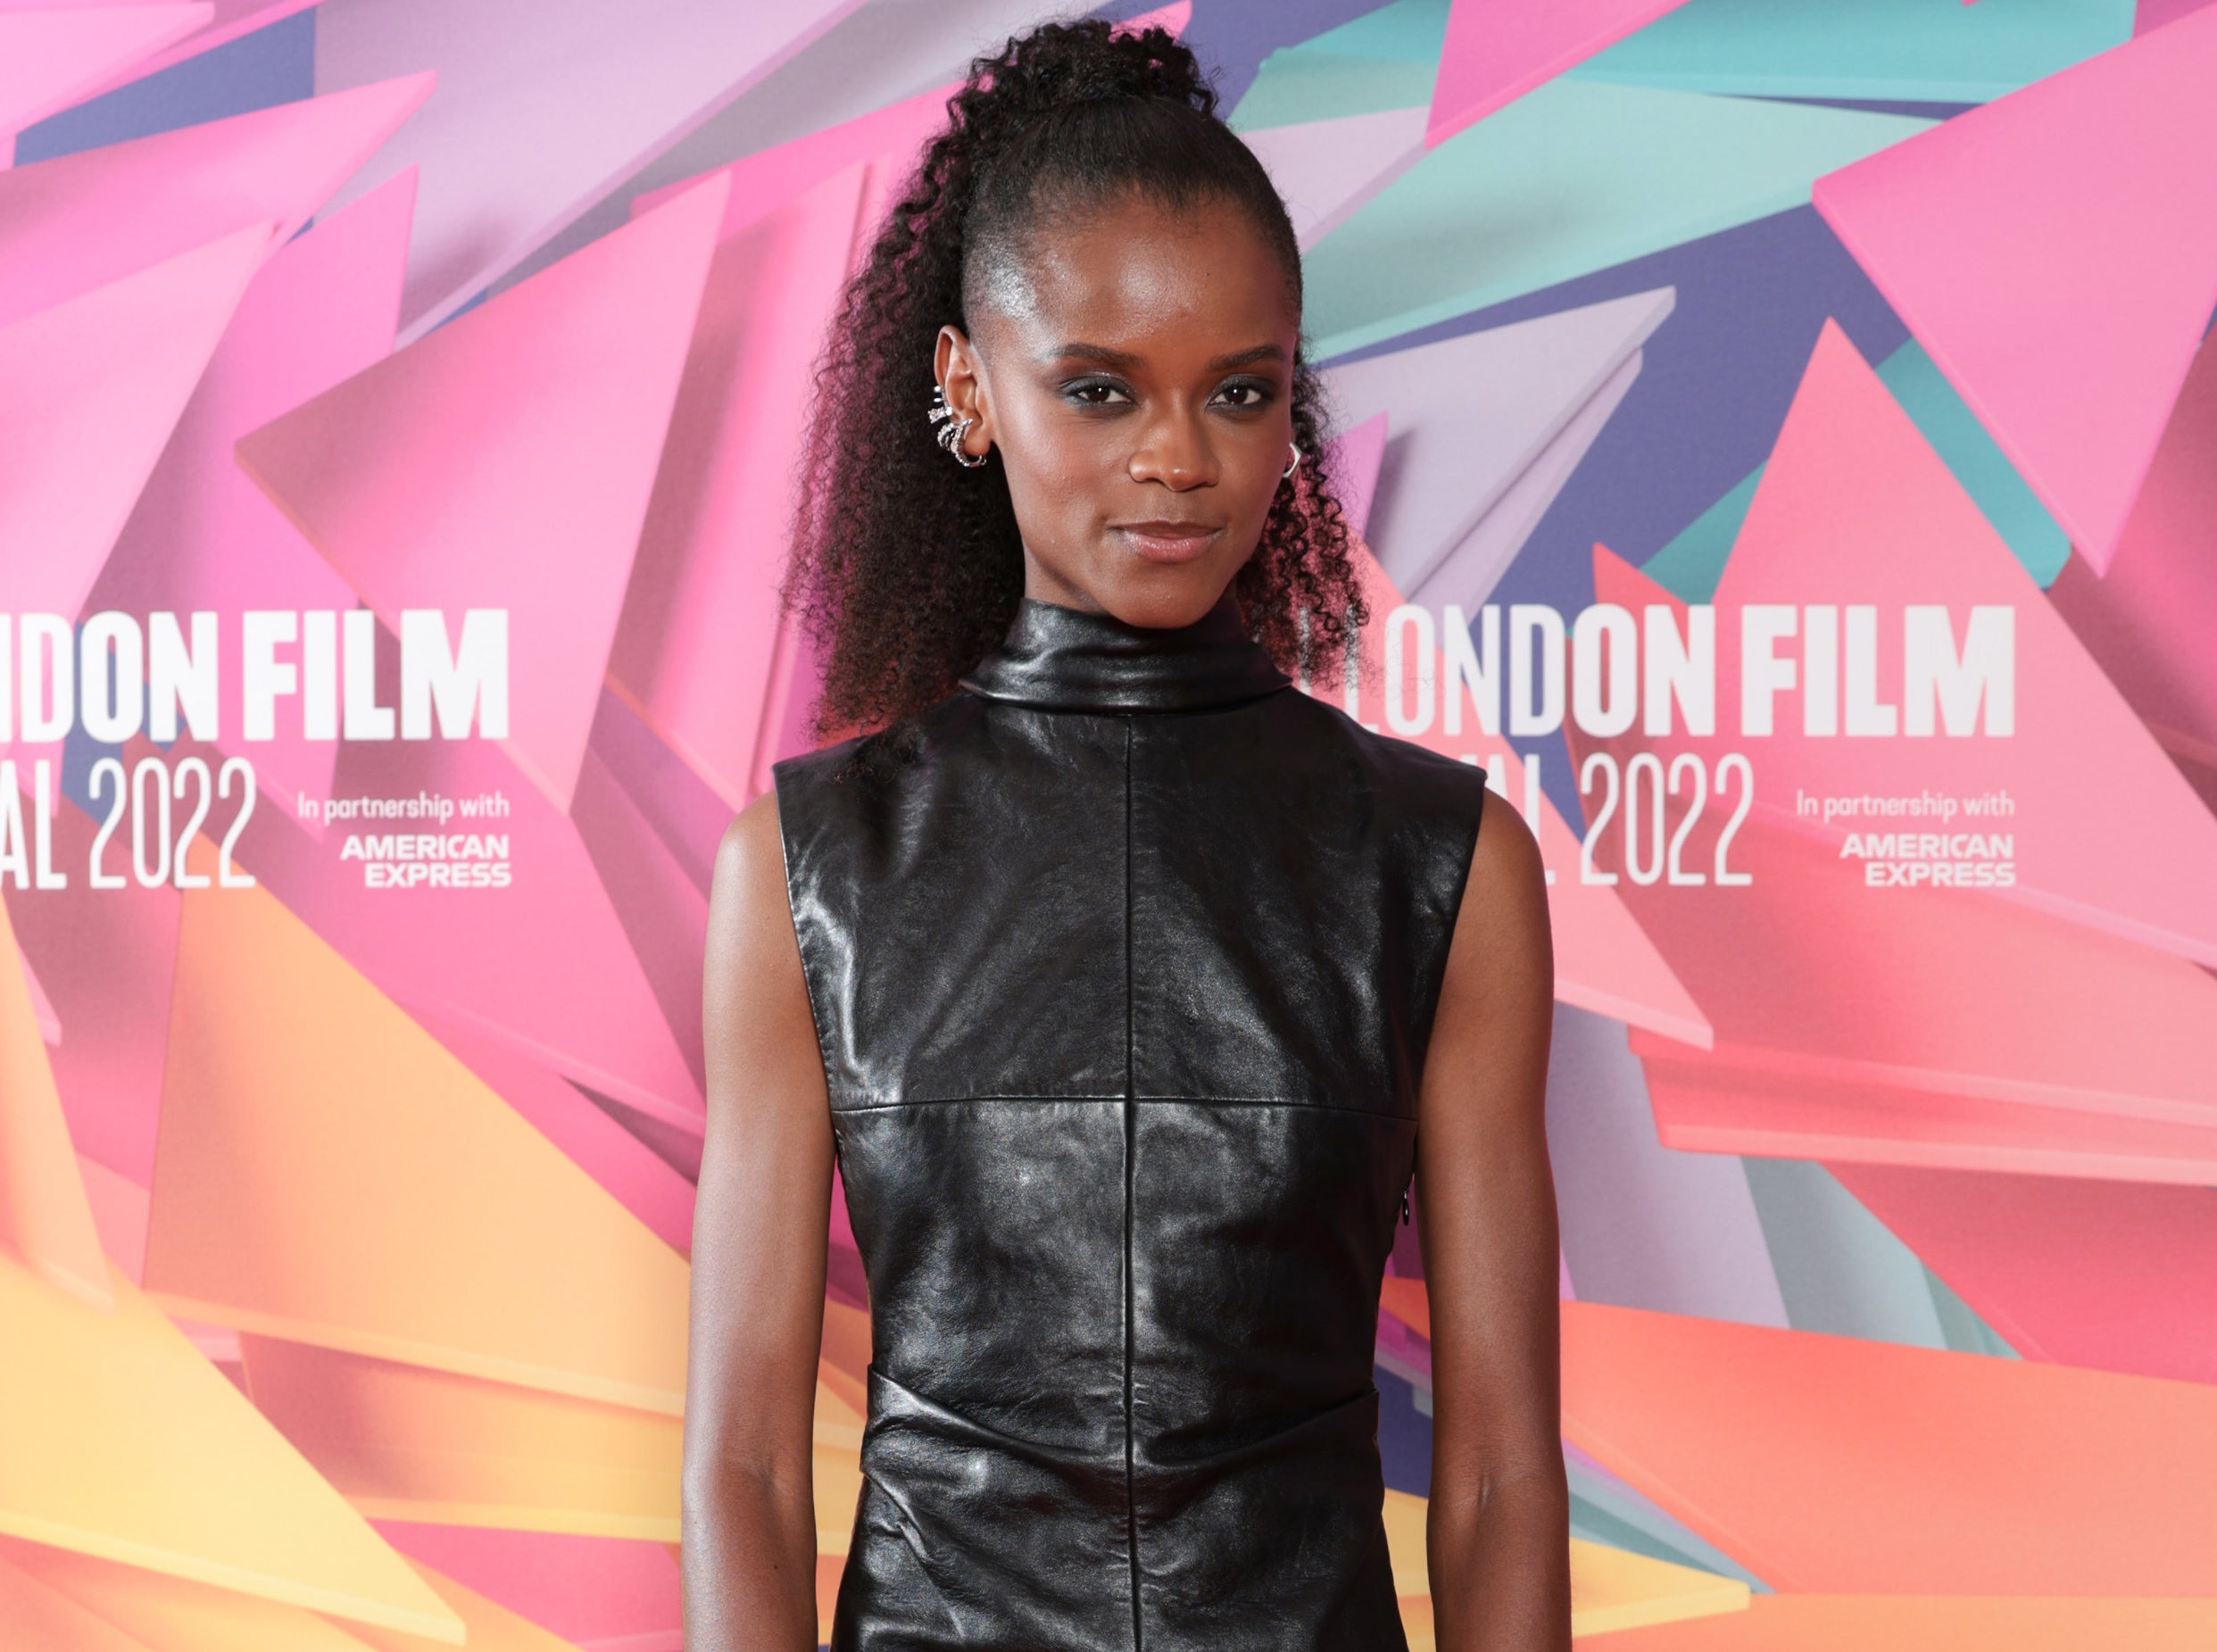 A close-up of Letitia in a sleeveless leather turtleneck outfit on the red carpet